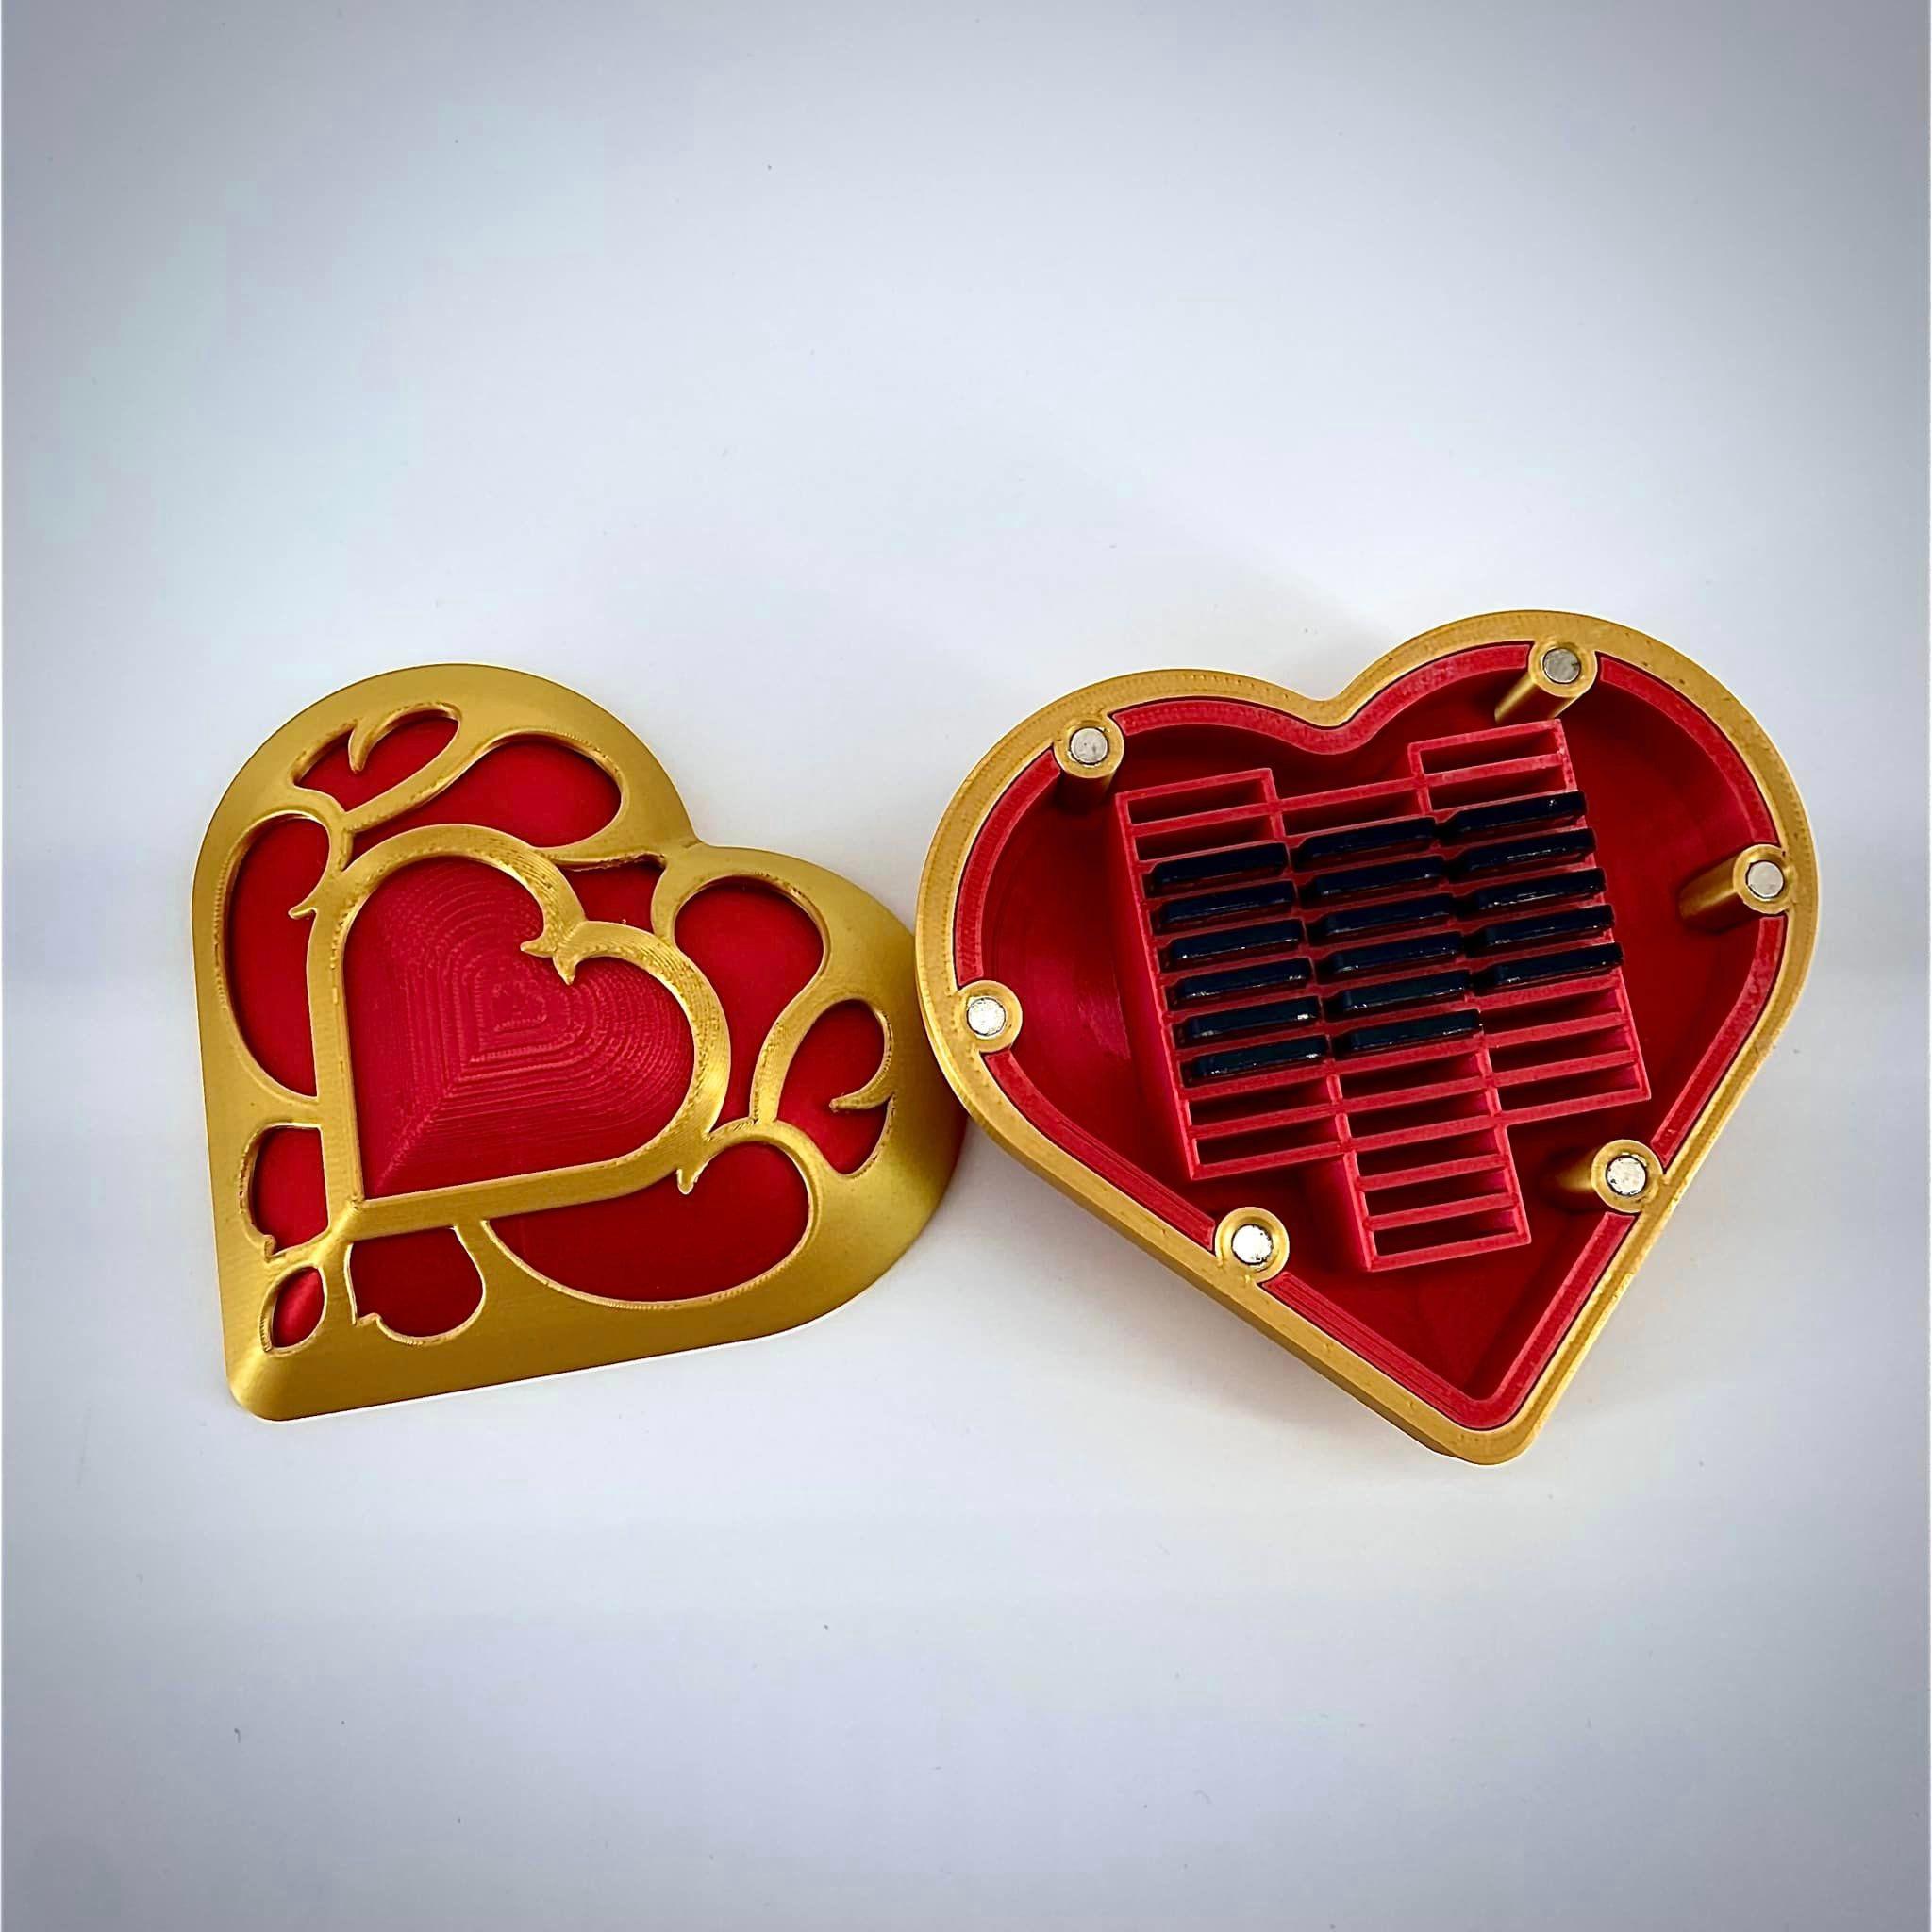 Heart Container Nintendo Switch Cartridge Case  3d model